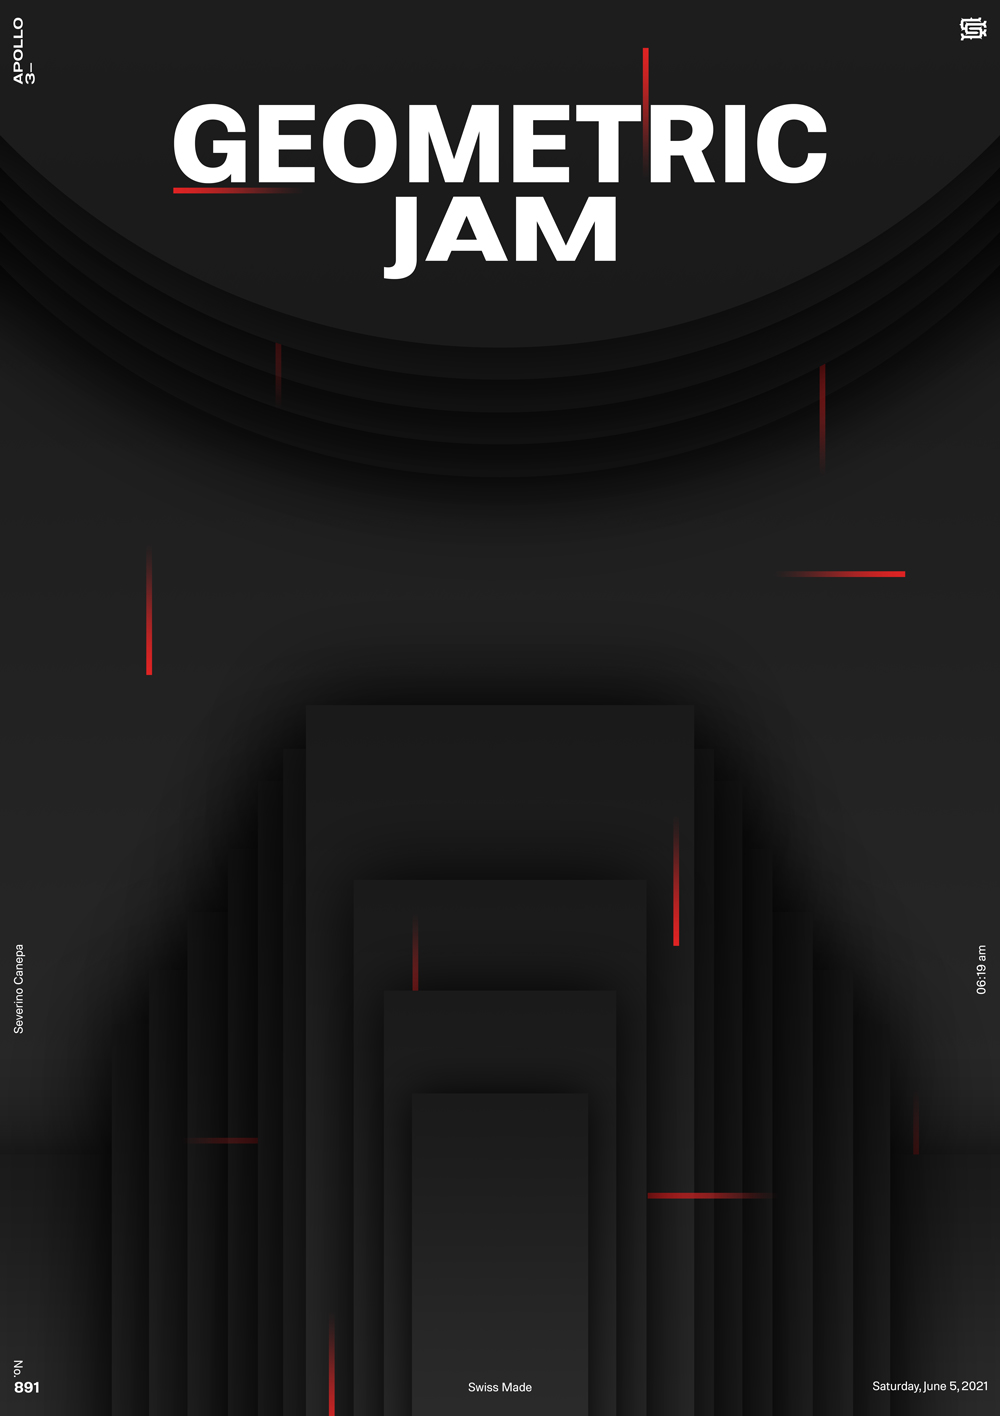 The first poster of the mini-series Geometric Jam in dark with red colors